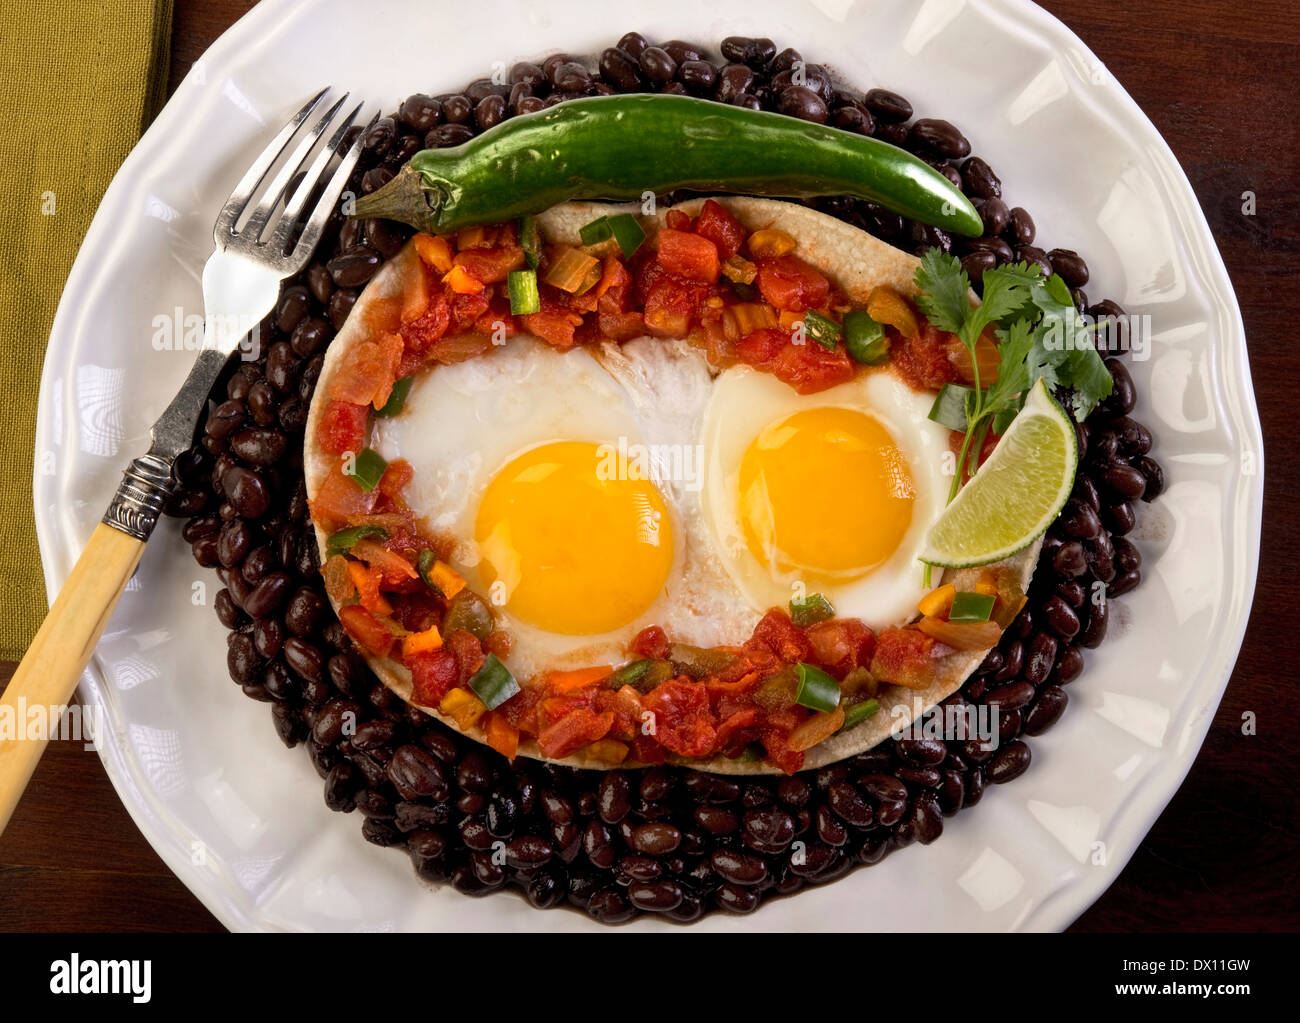 Mexican flour tortilla, salsa, peppers and eggs. Stock Photo